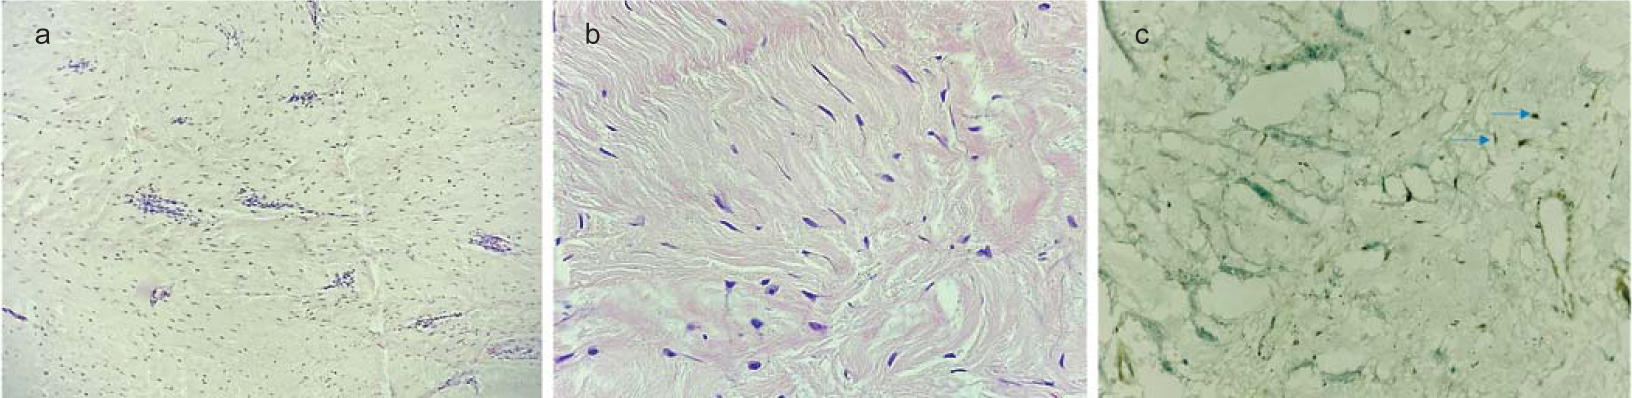 Haematoxylin and eosin-stained sections from tumour (a ×100; b ×400) show a hypocellular spindle cell neoplasm composed of bland spindle cells in a fibrotic stroma with interspersed thin wall vessels showing perivascular lymphocytic cuffing. The tumour cells (blue arrows) show nuclear accumulation of beta-catenin on immunohistochemistry (c ×400)